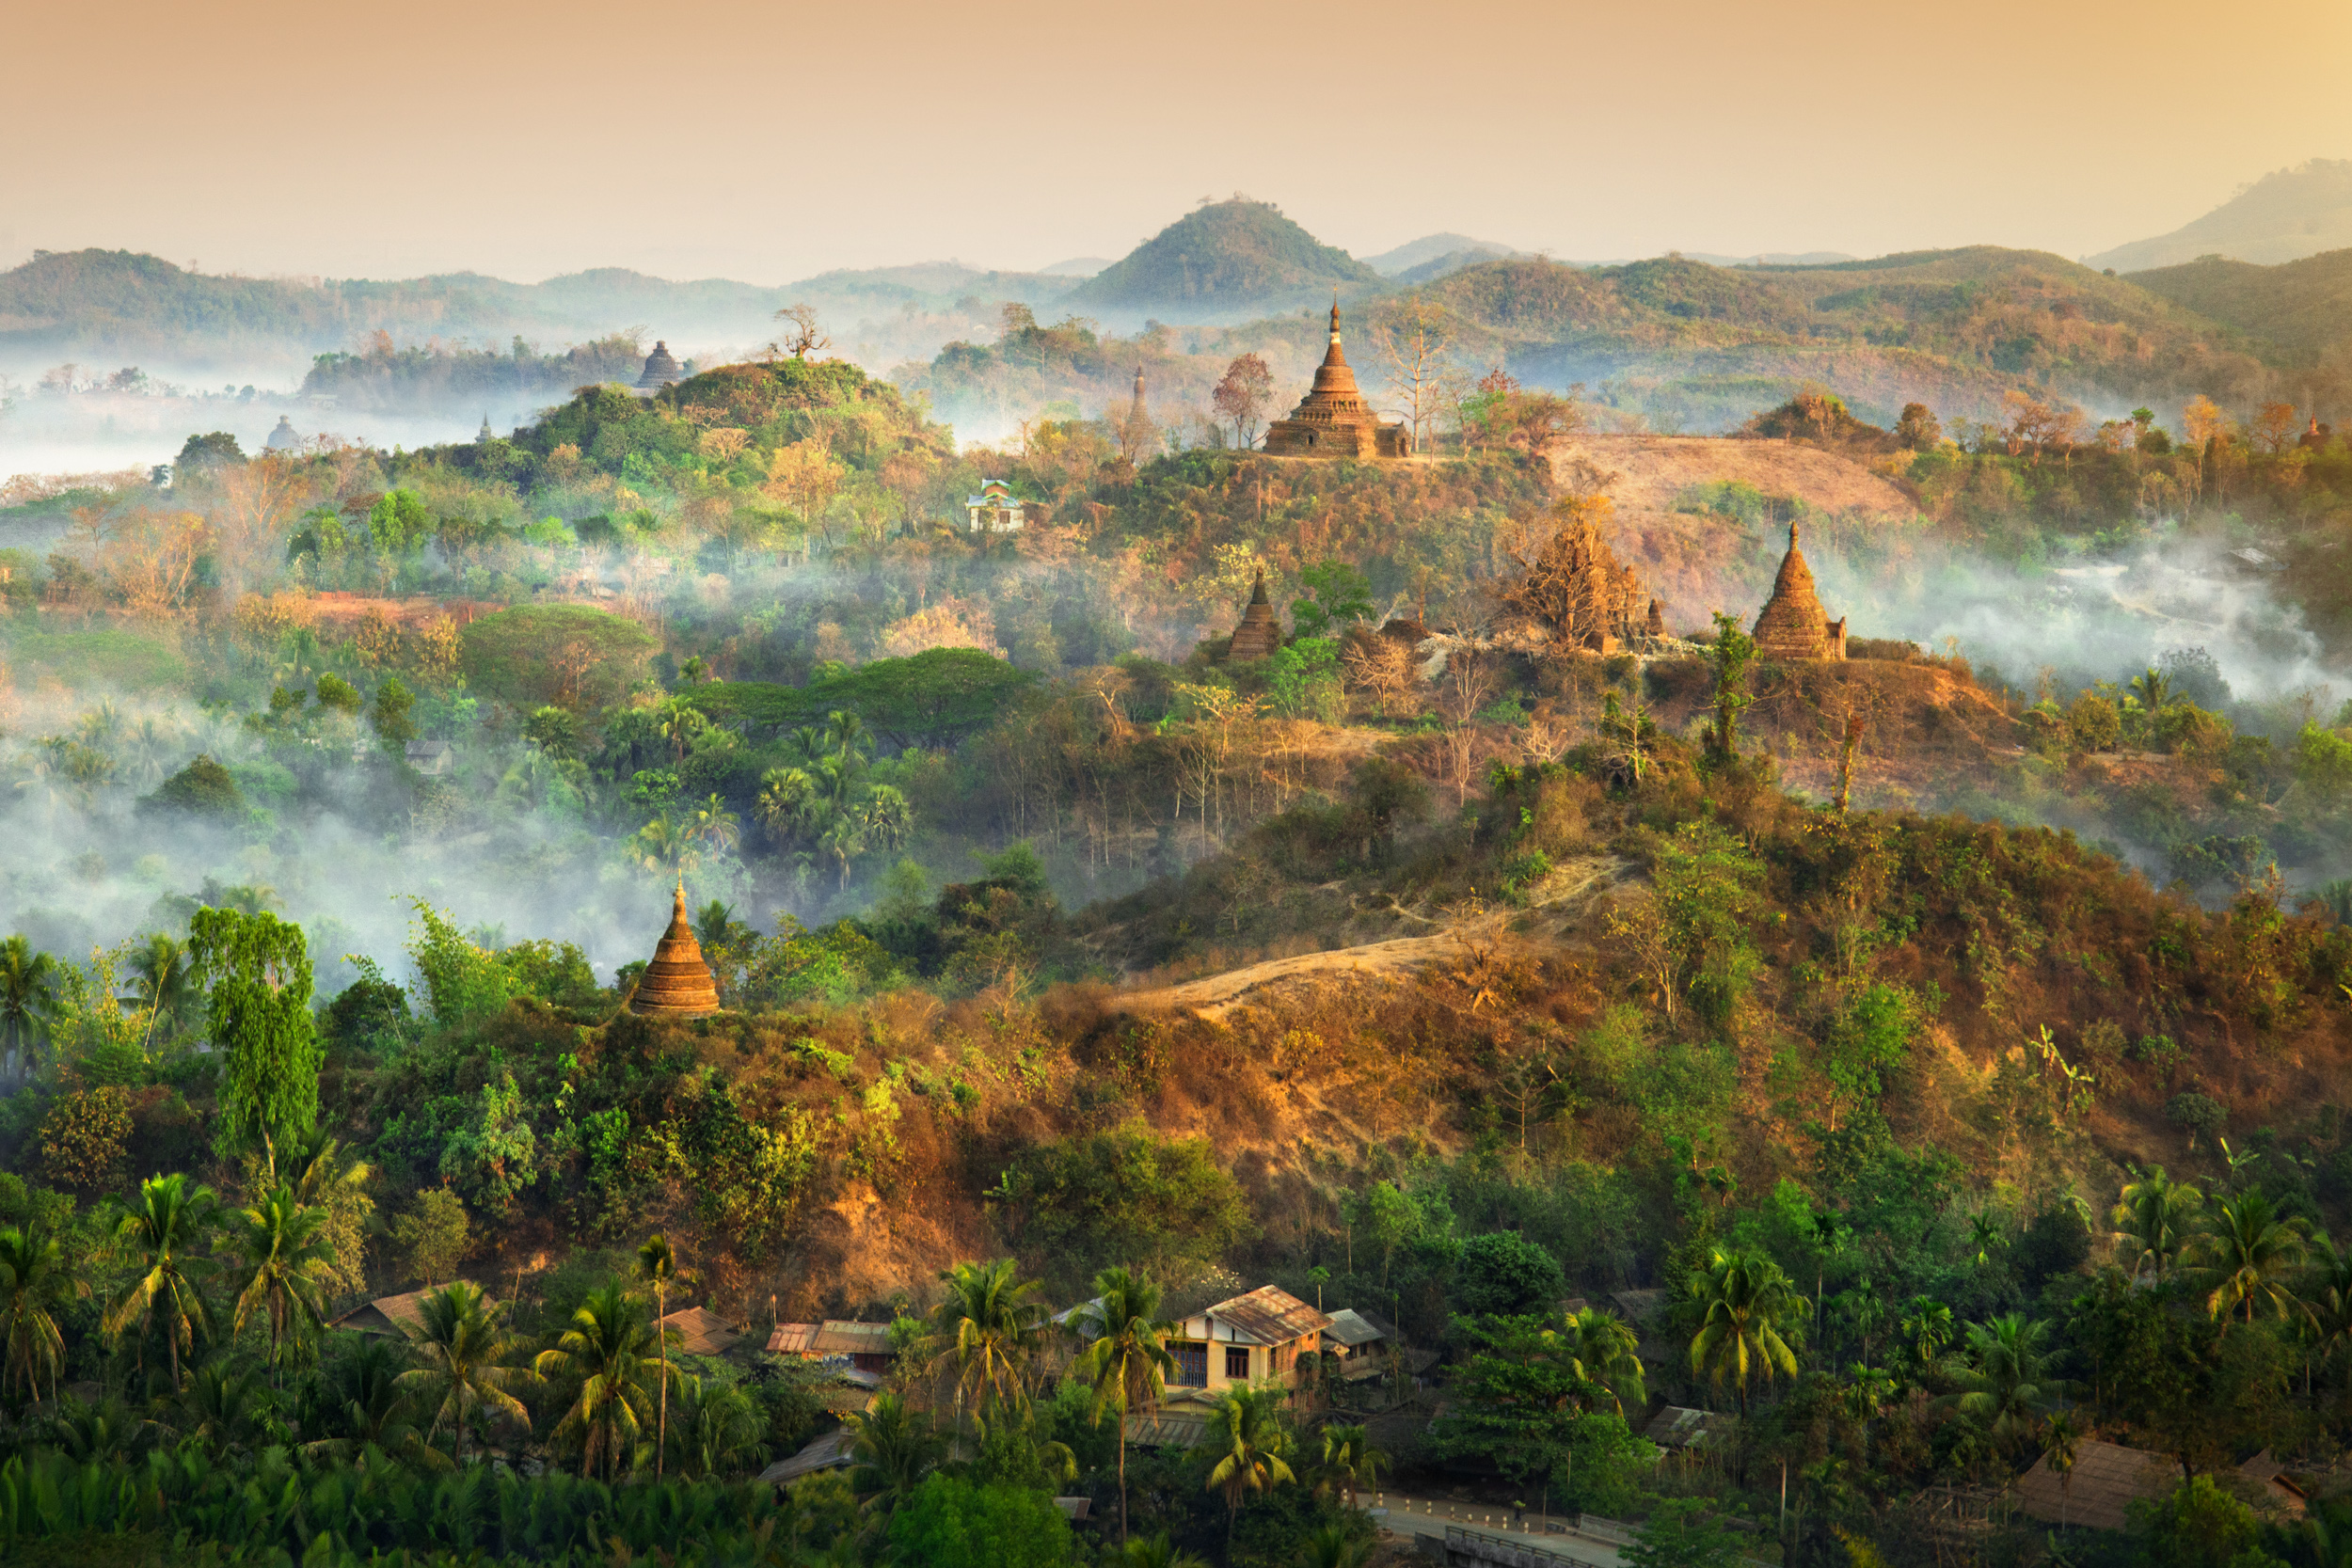 Aerial view of multiple stupas with smoke curling through them and the hills at sunrise, Myanmar